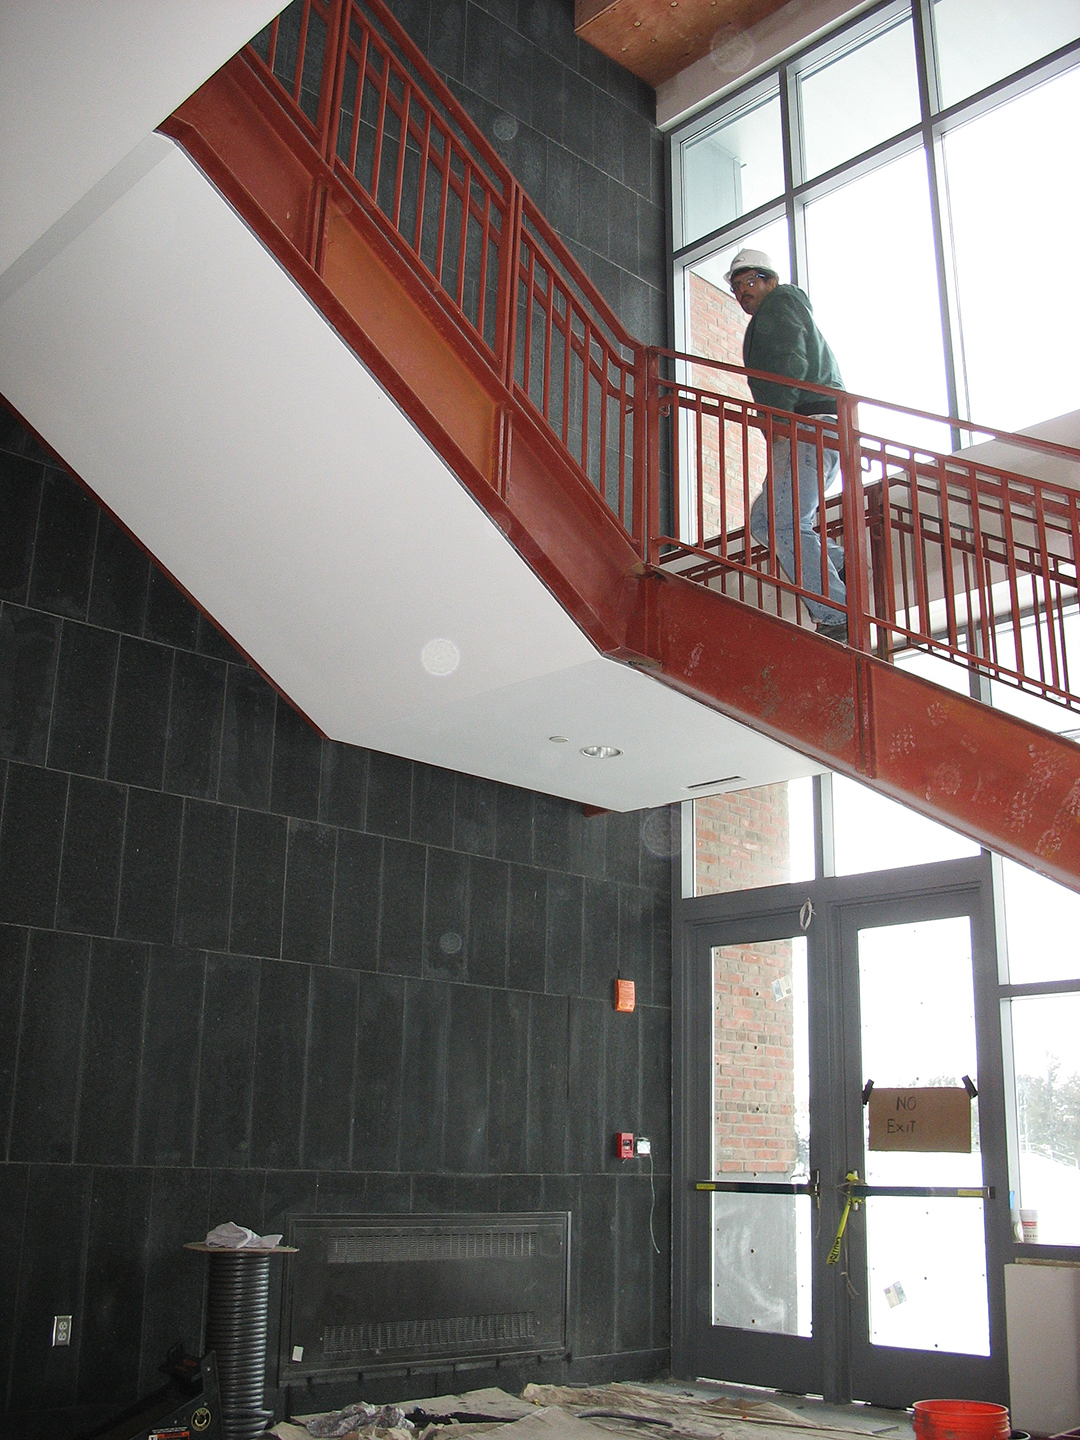 The main stairway with its granite walls. (Doug Hubley/Bates College)